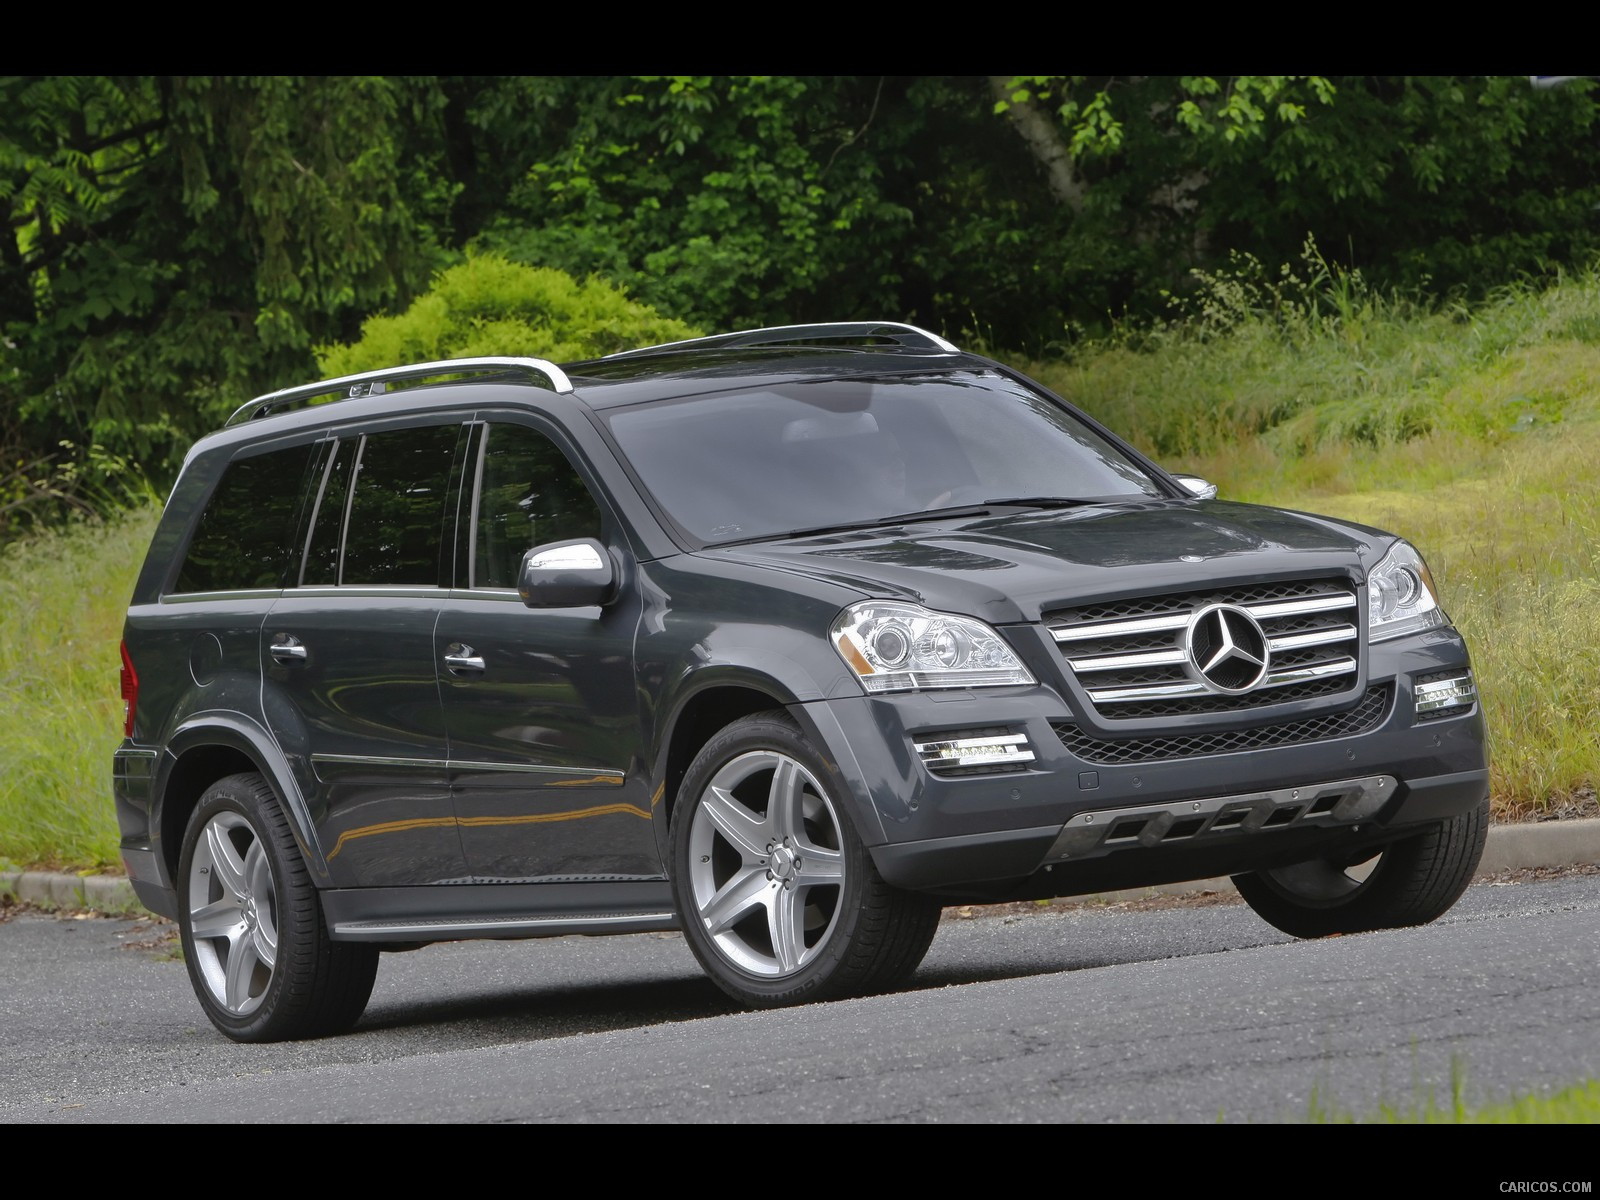 2010 Mercedes-Benz GL550 - Front, #46 of 112